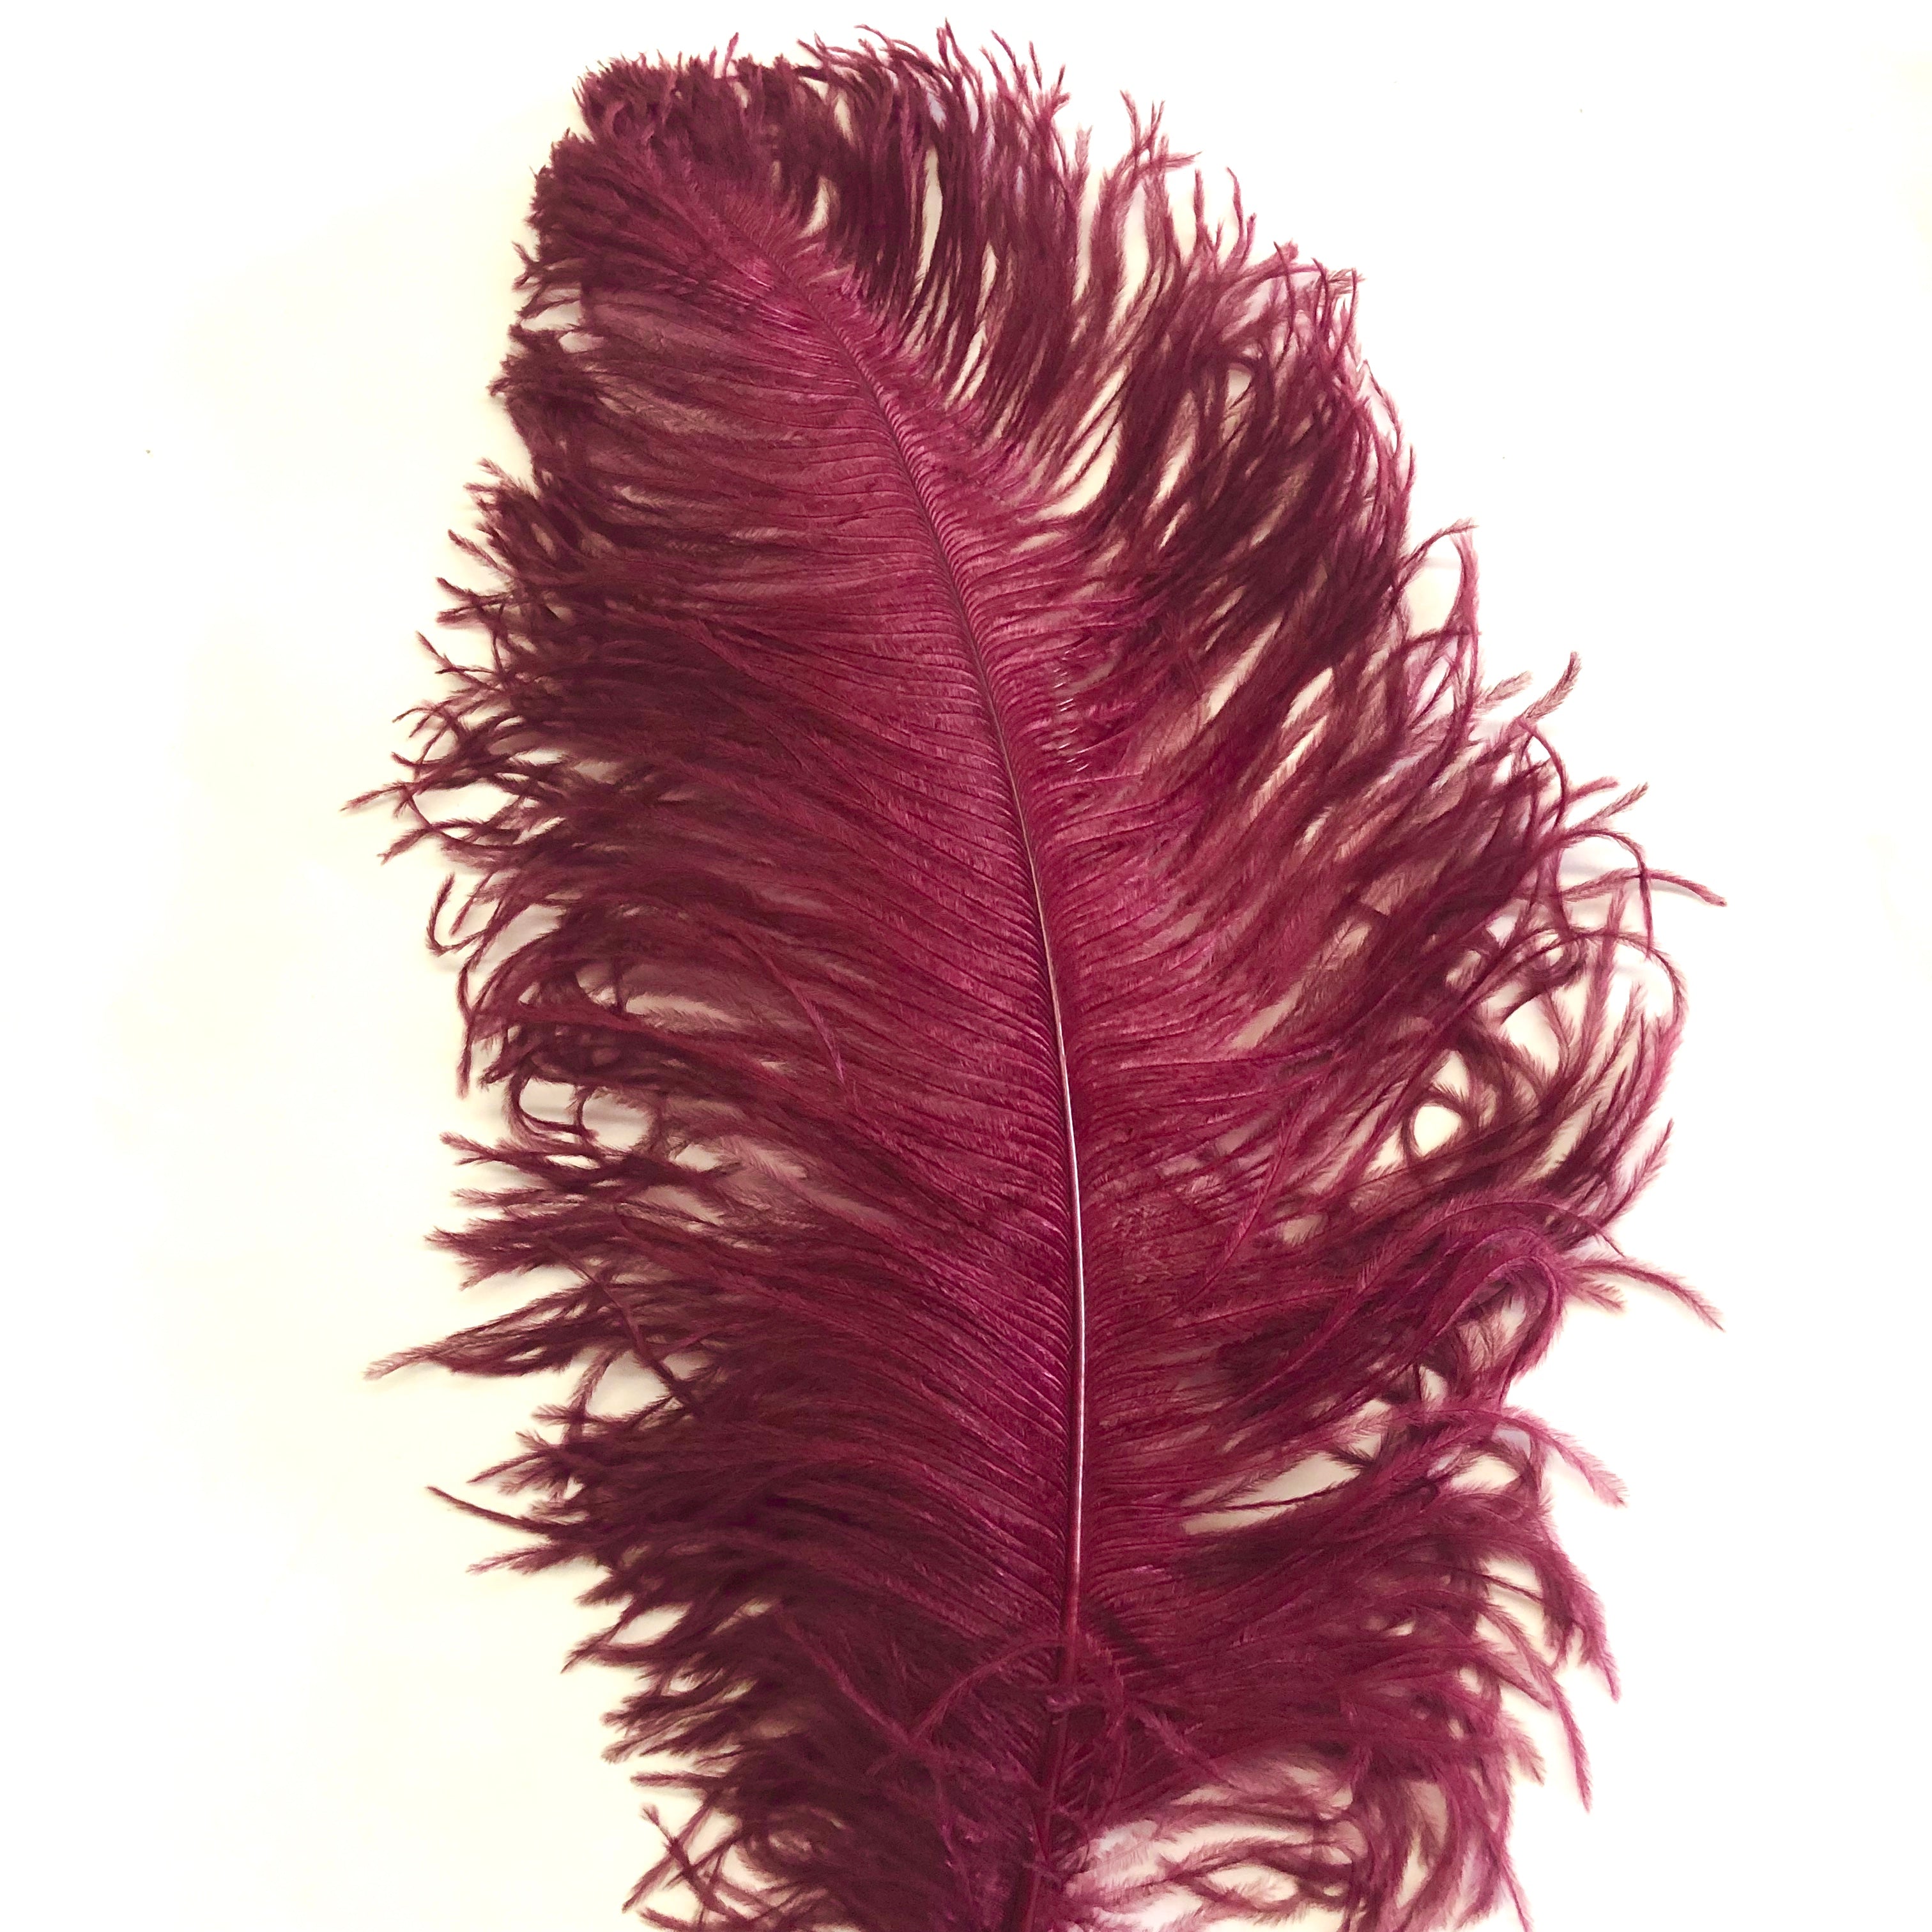 Ostrich Wing Feather Plumes 60-65cm (24-26") - Burgundy